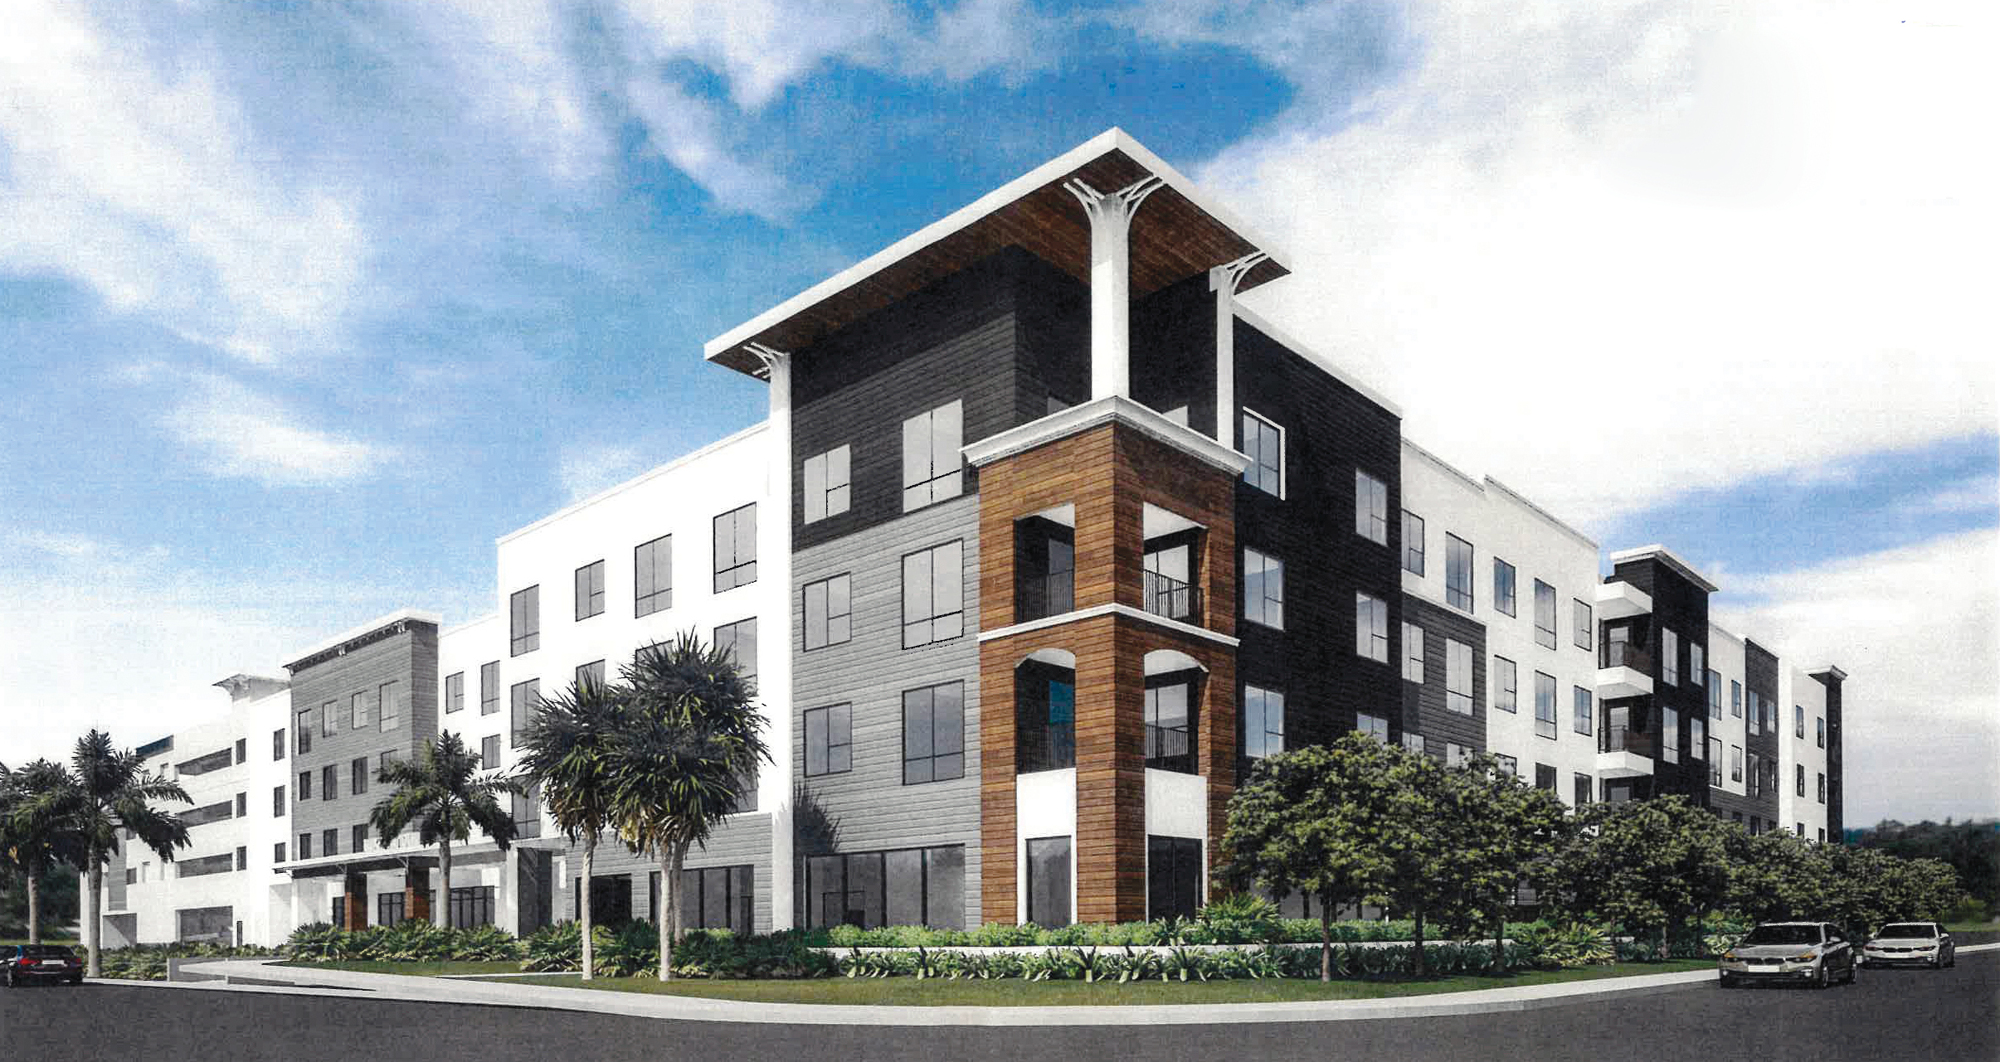 City staff cited the approval of the Luxe on Tenth project as proof of the efficacy of new density incentives with affordable housing provisions, though some officials have questioned whether those provisions are strict enough.